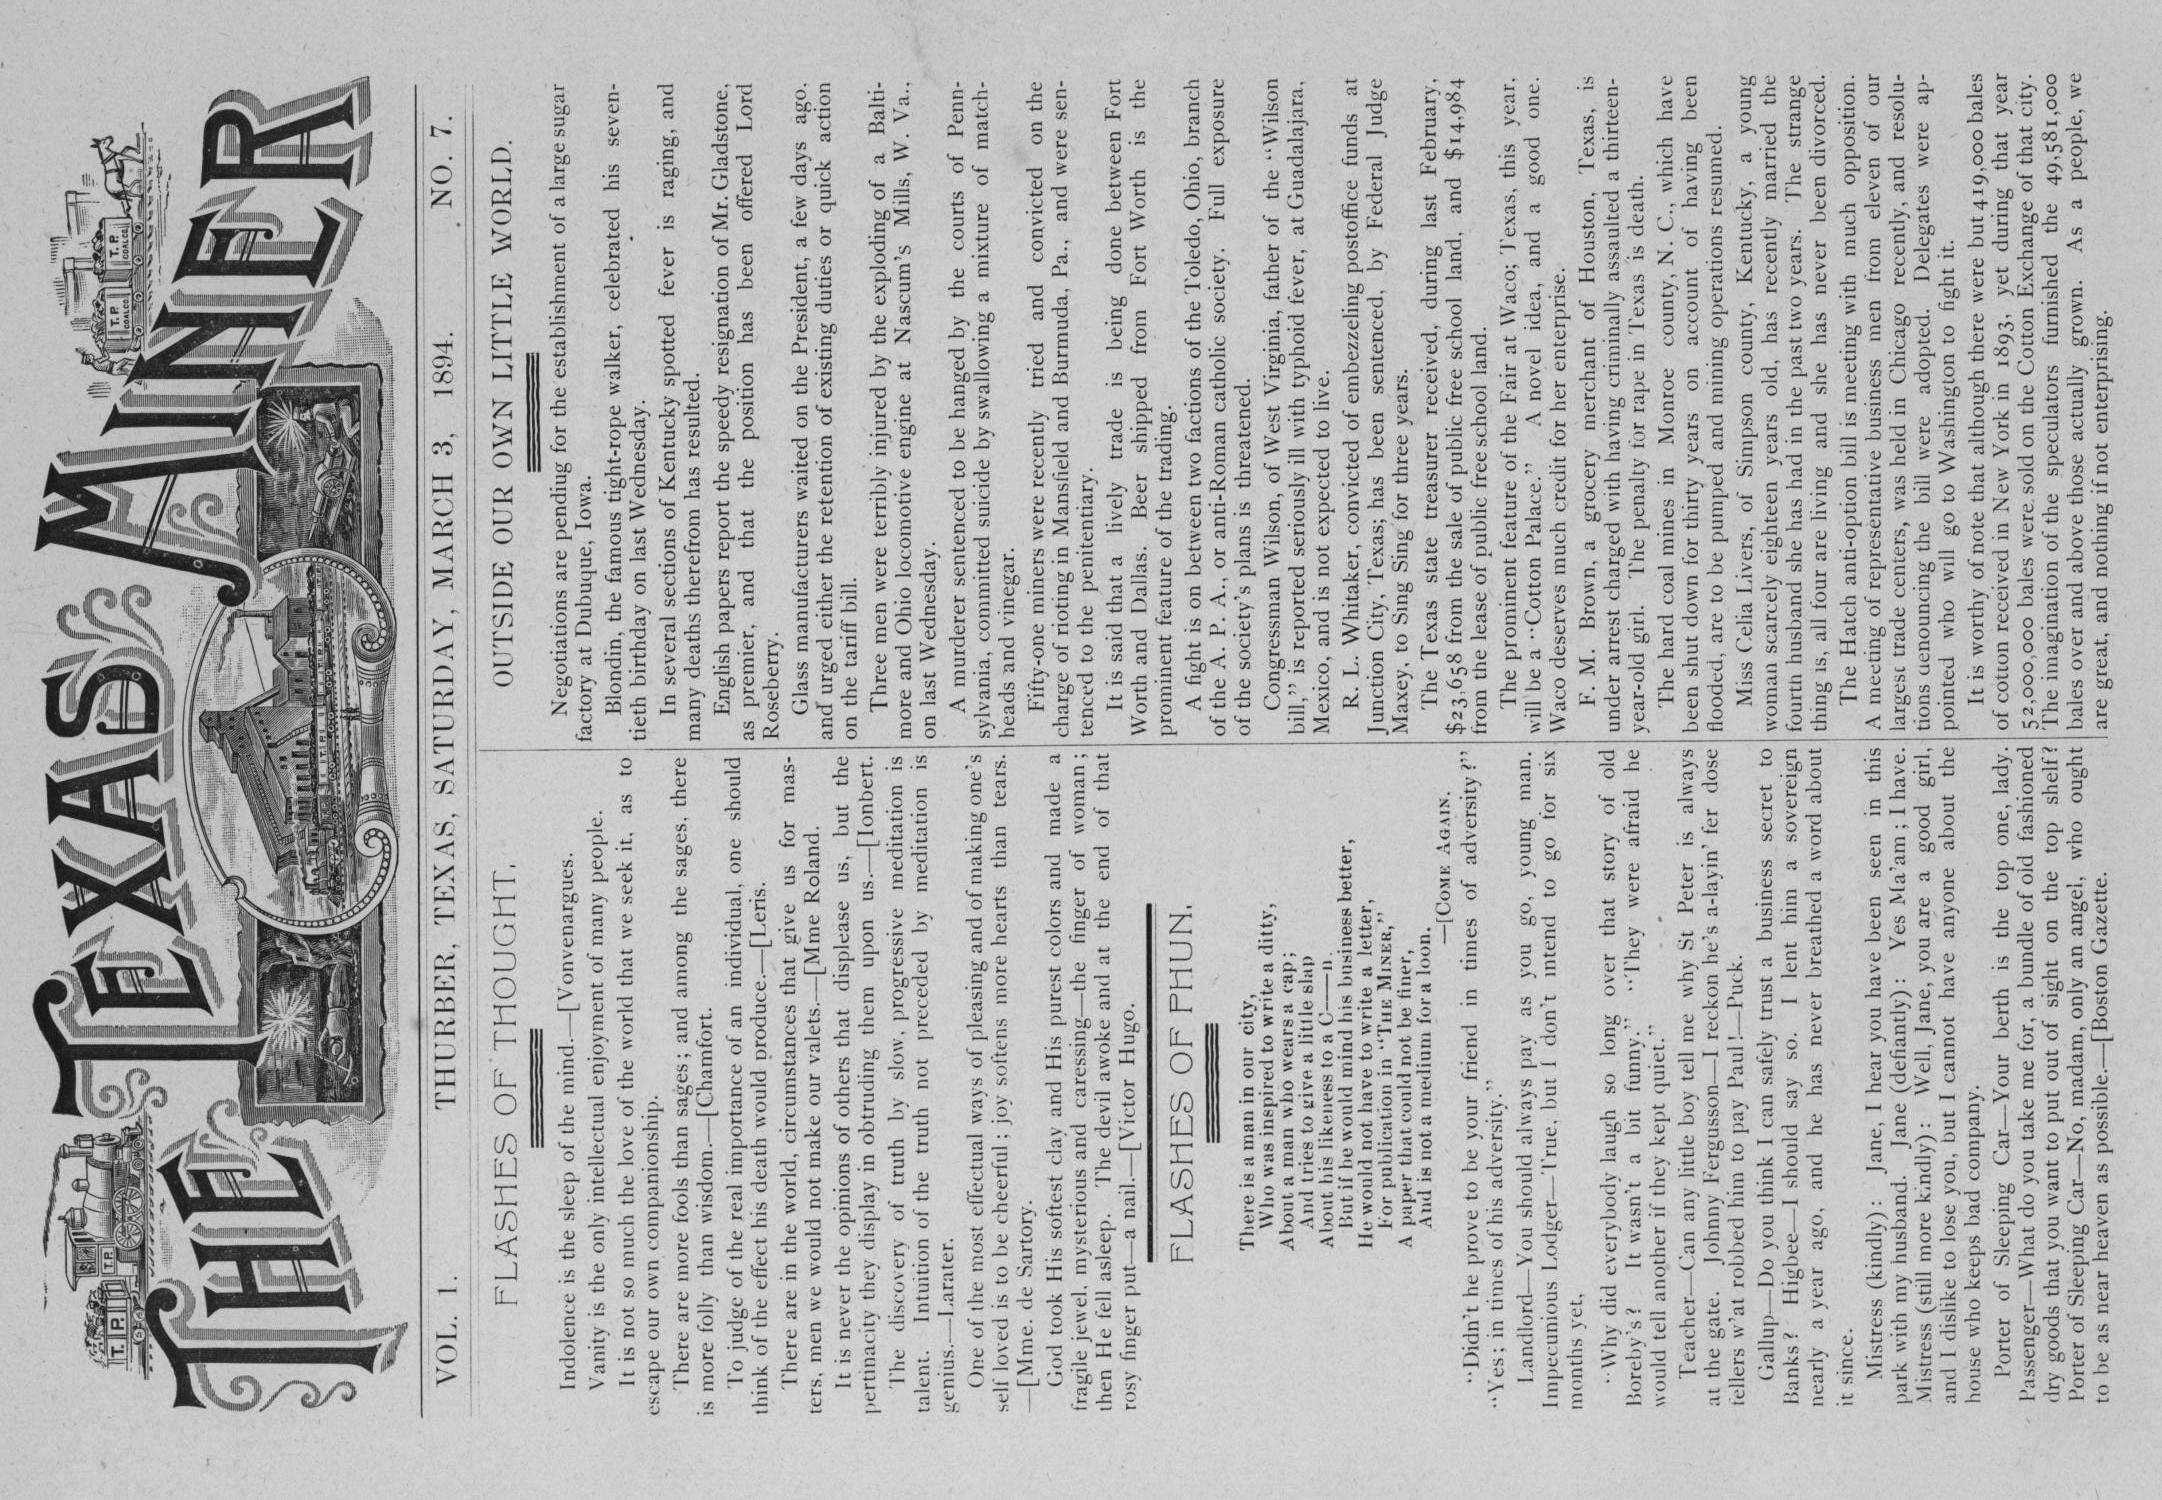 The Texas Miner, Volume 1, Number 7, March 3, 1894
                                                
                                                    1
                                                